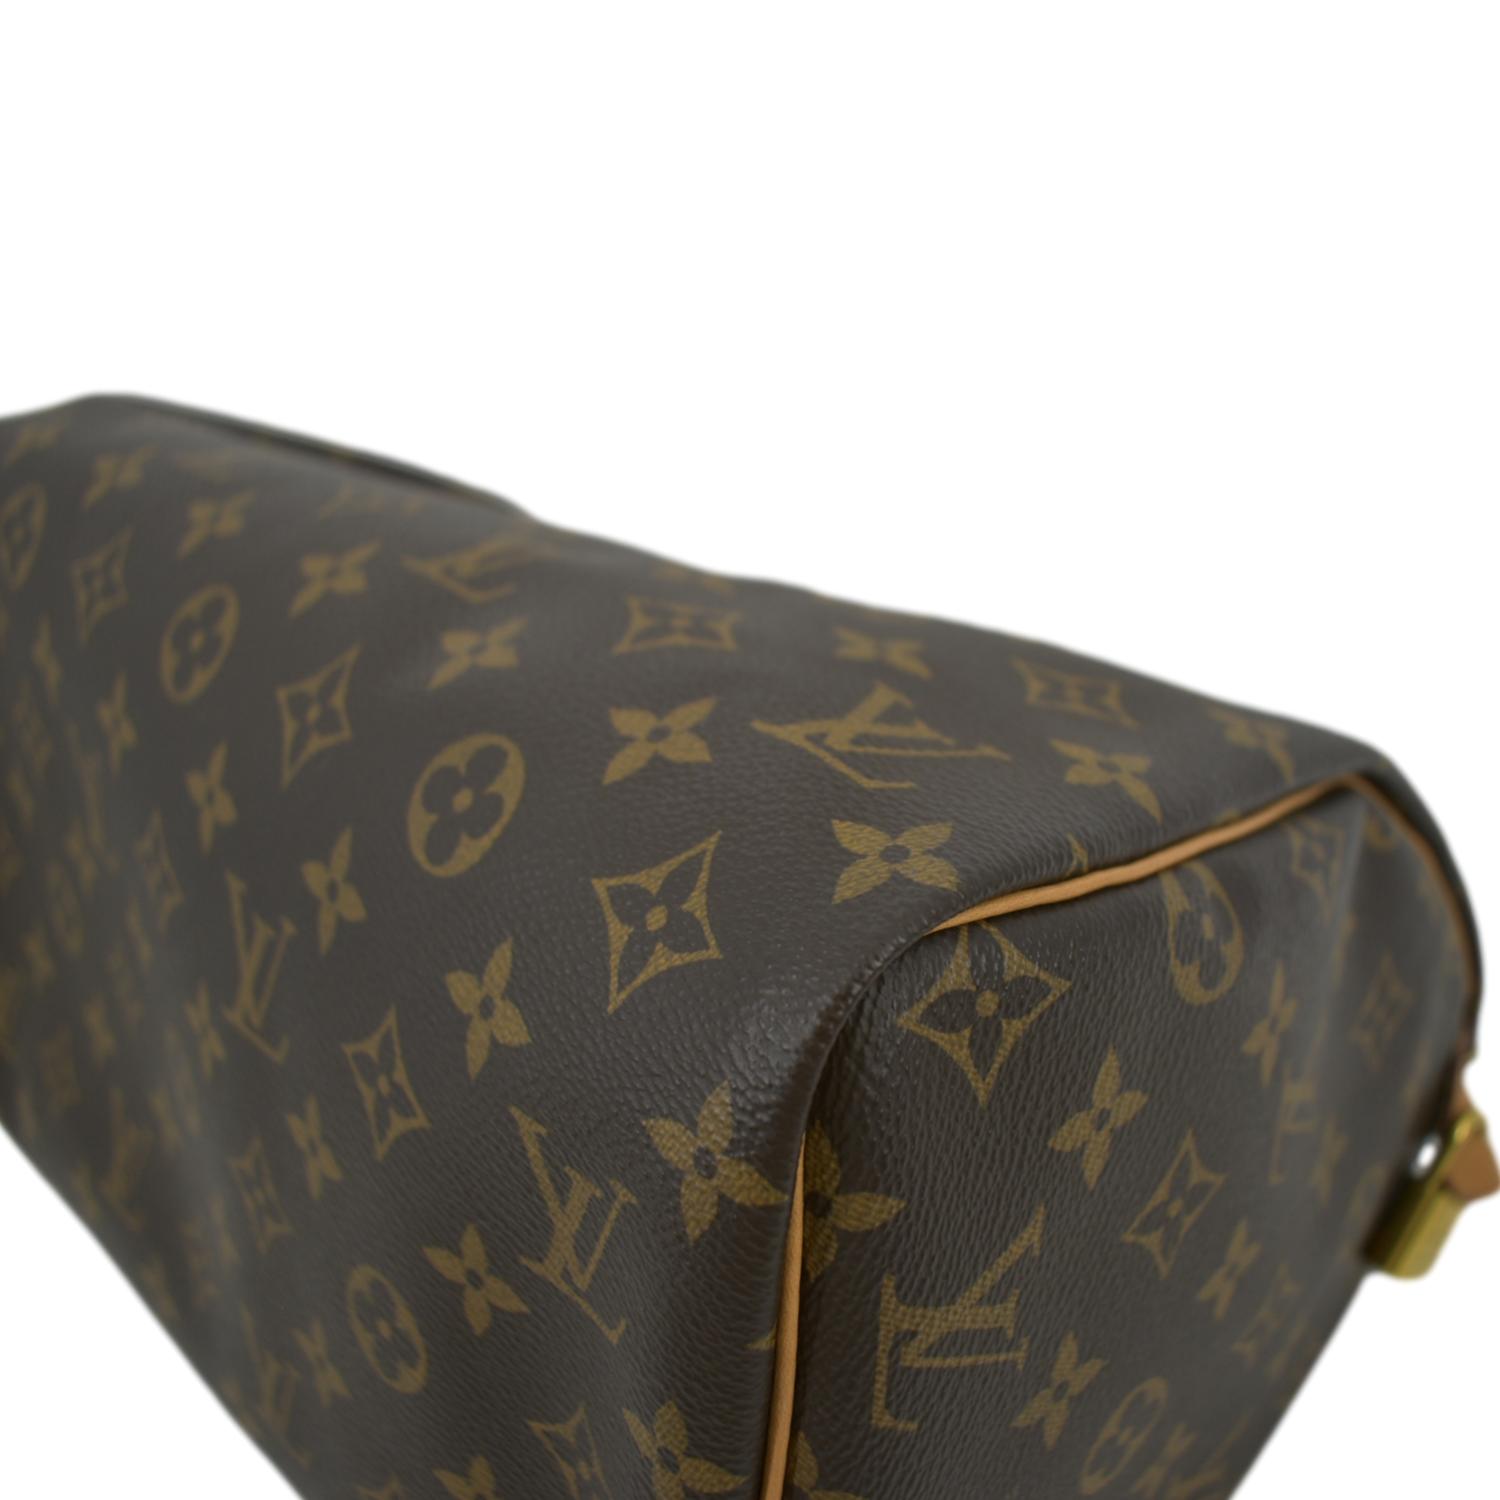 Indulge in the epitome of luxury with these Louis Vuitton styles